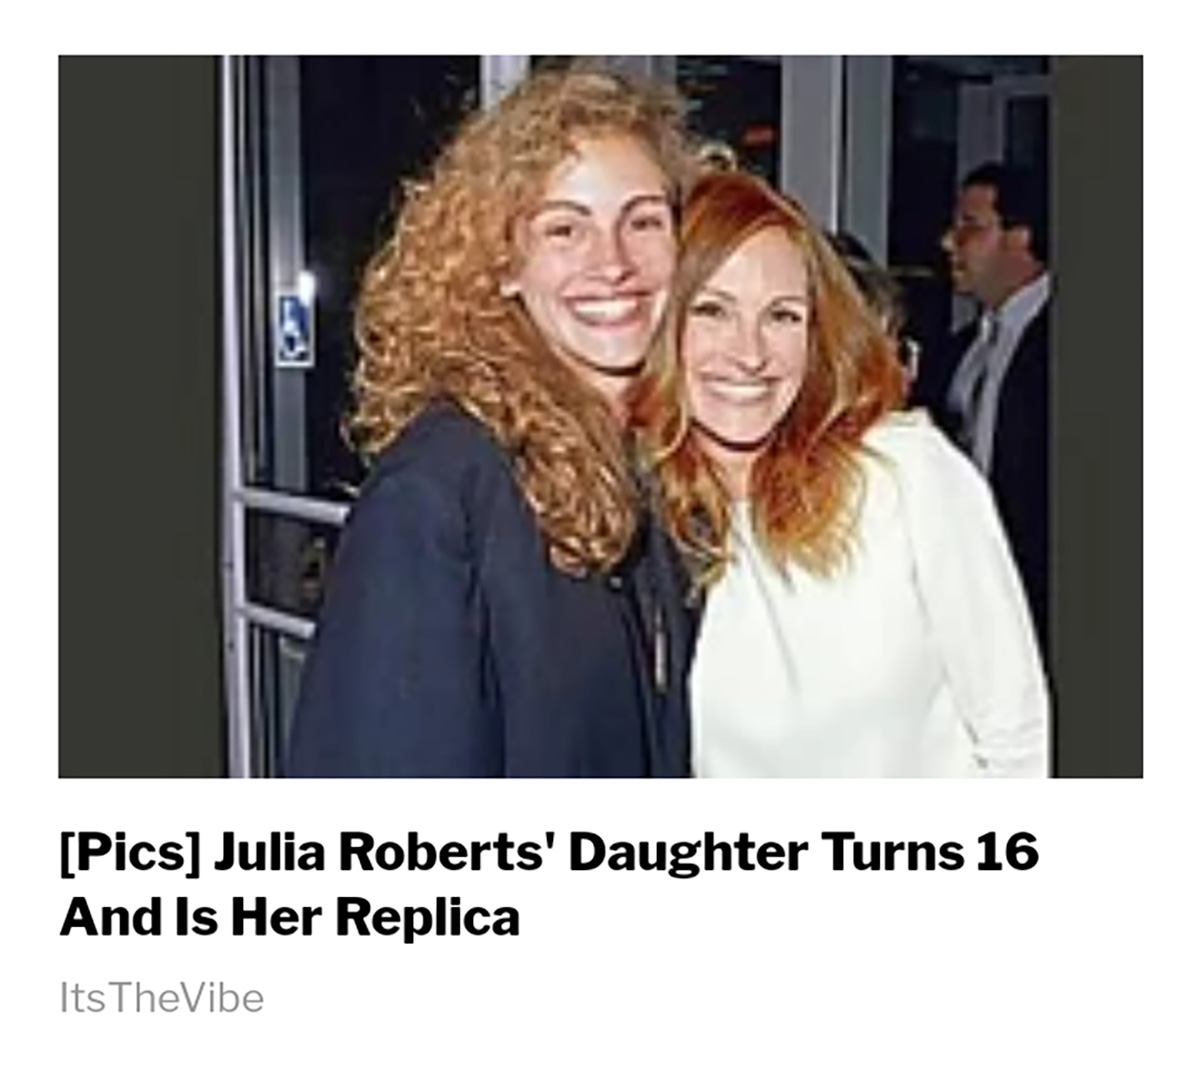 An online advertisement claimed that Julia Roberts daughter turns 16 and is her replica but did not show Hazel Moder.